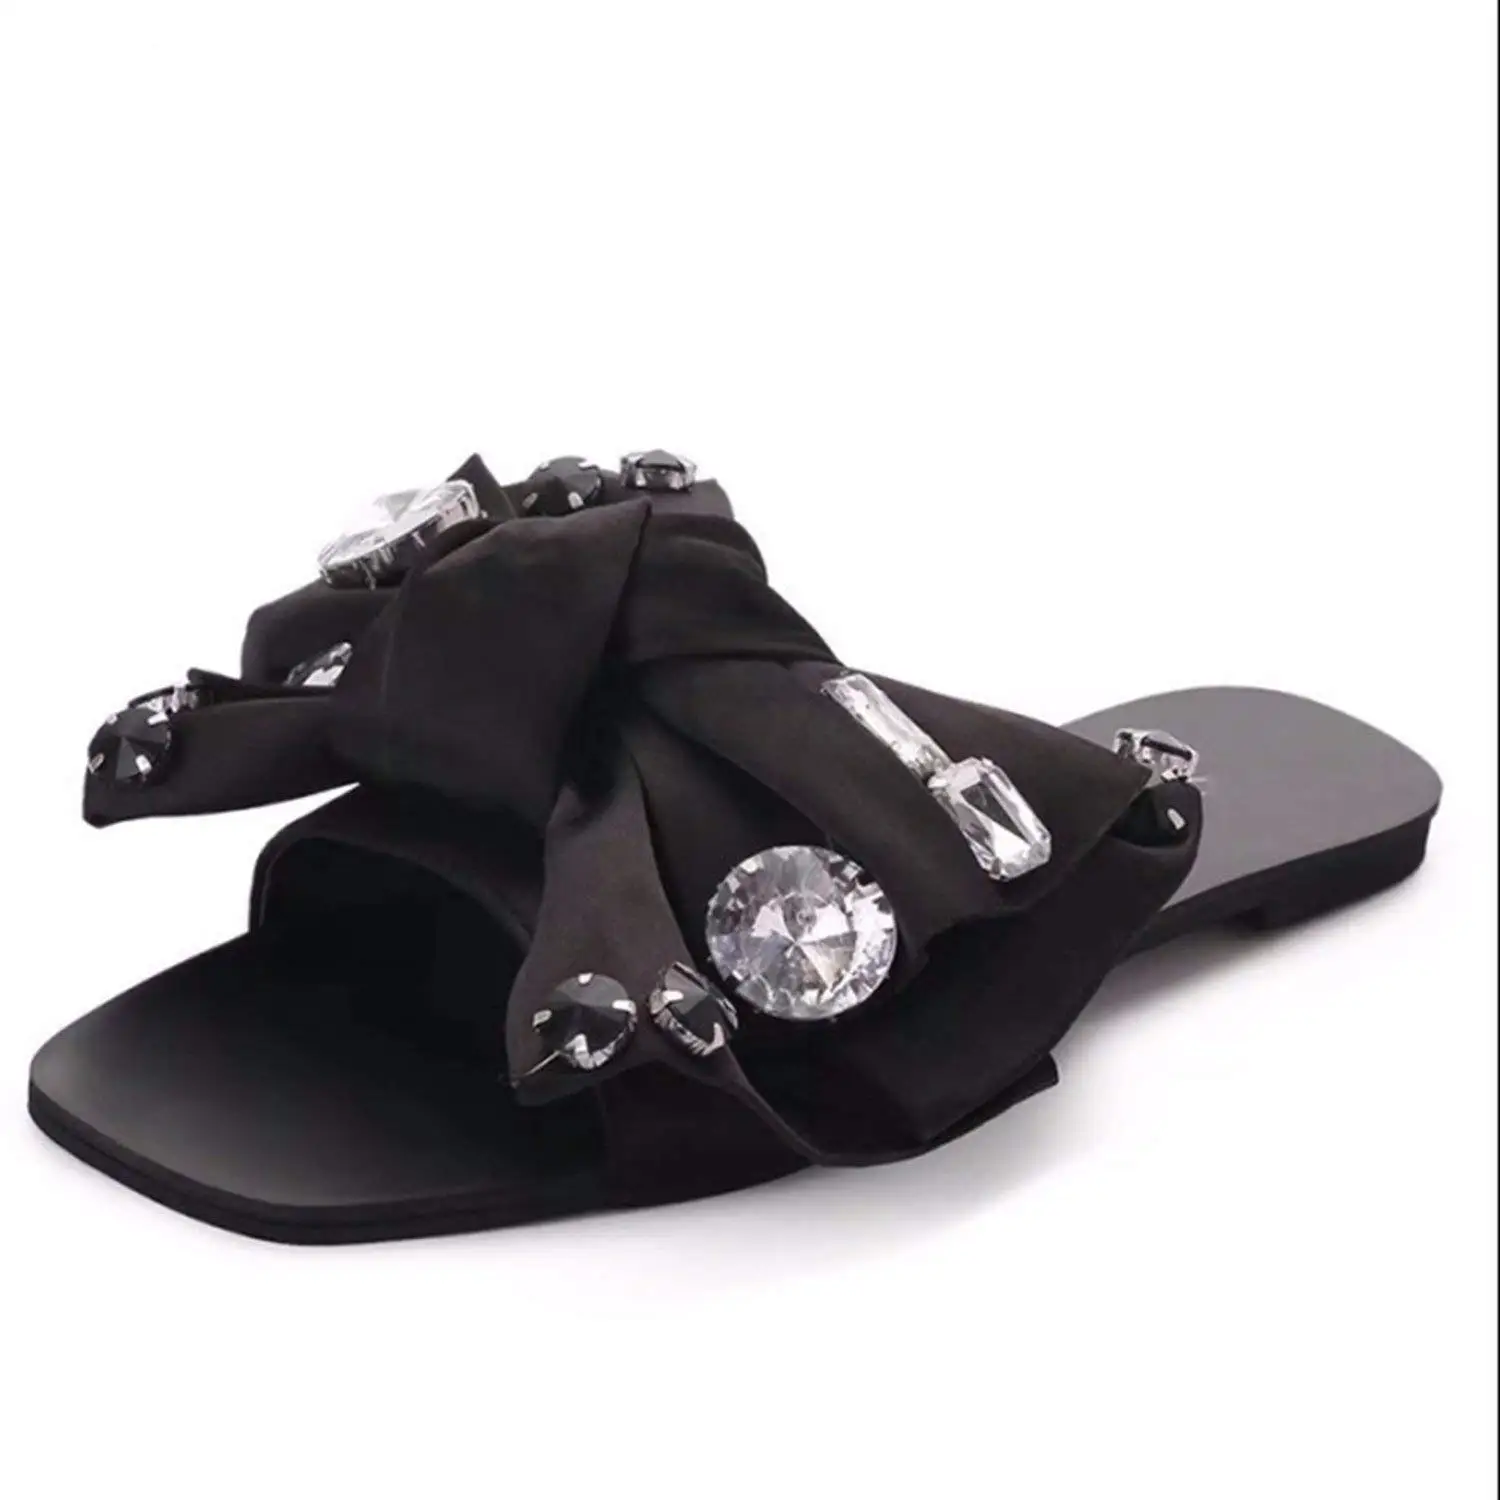 ladies leather house slippers